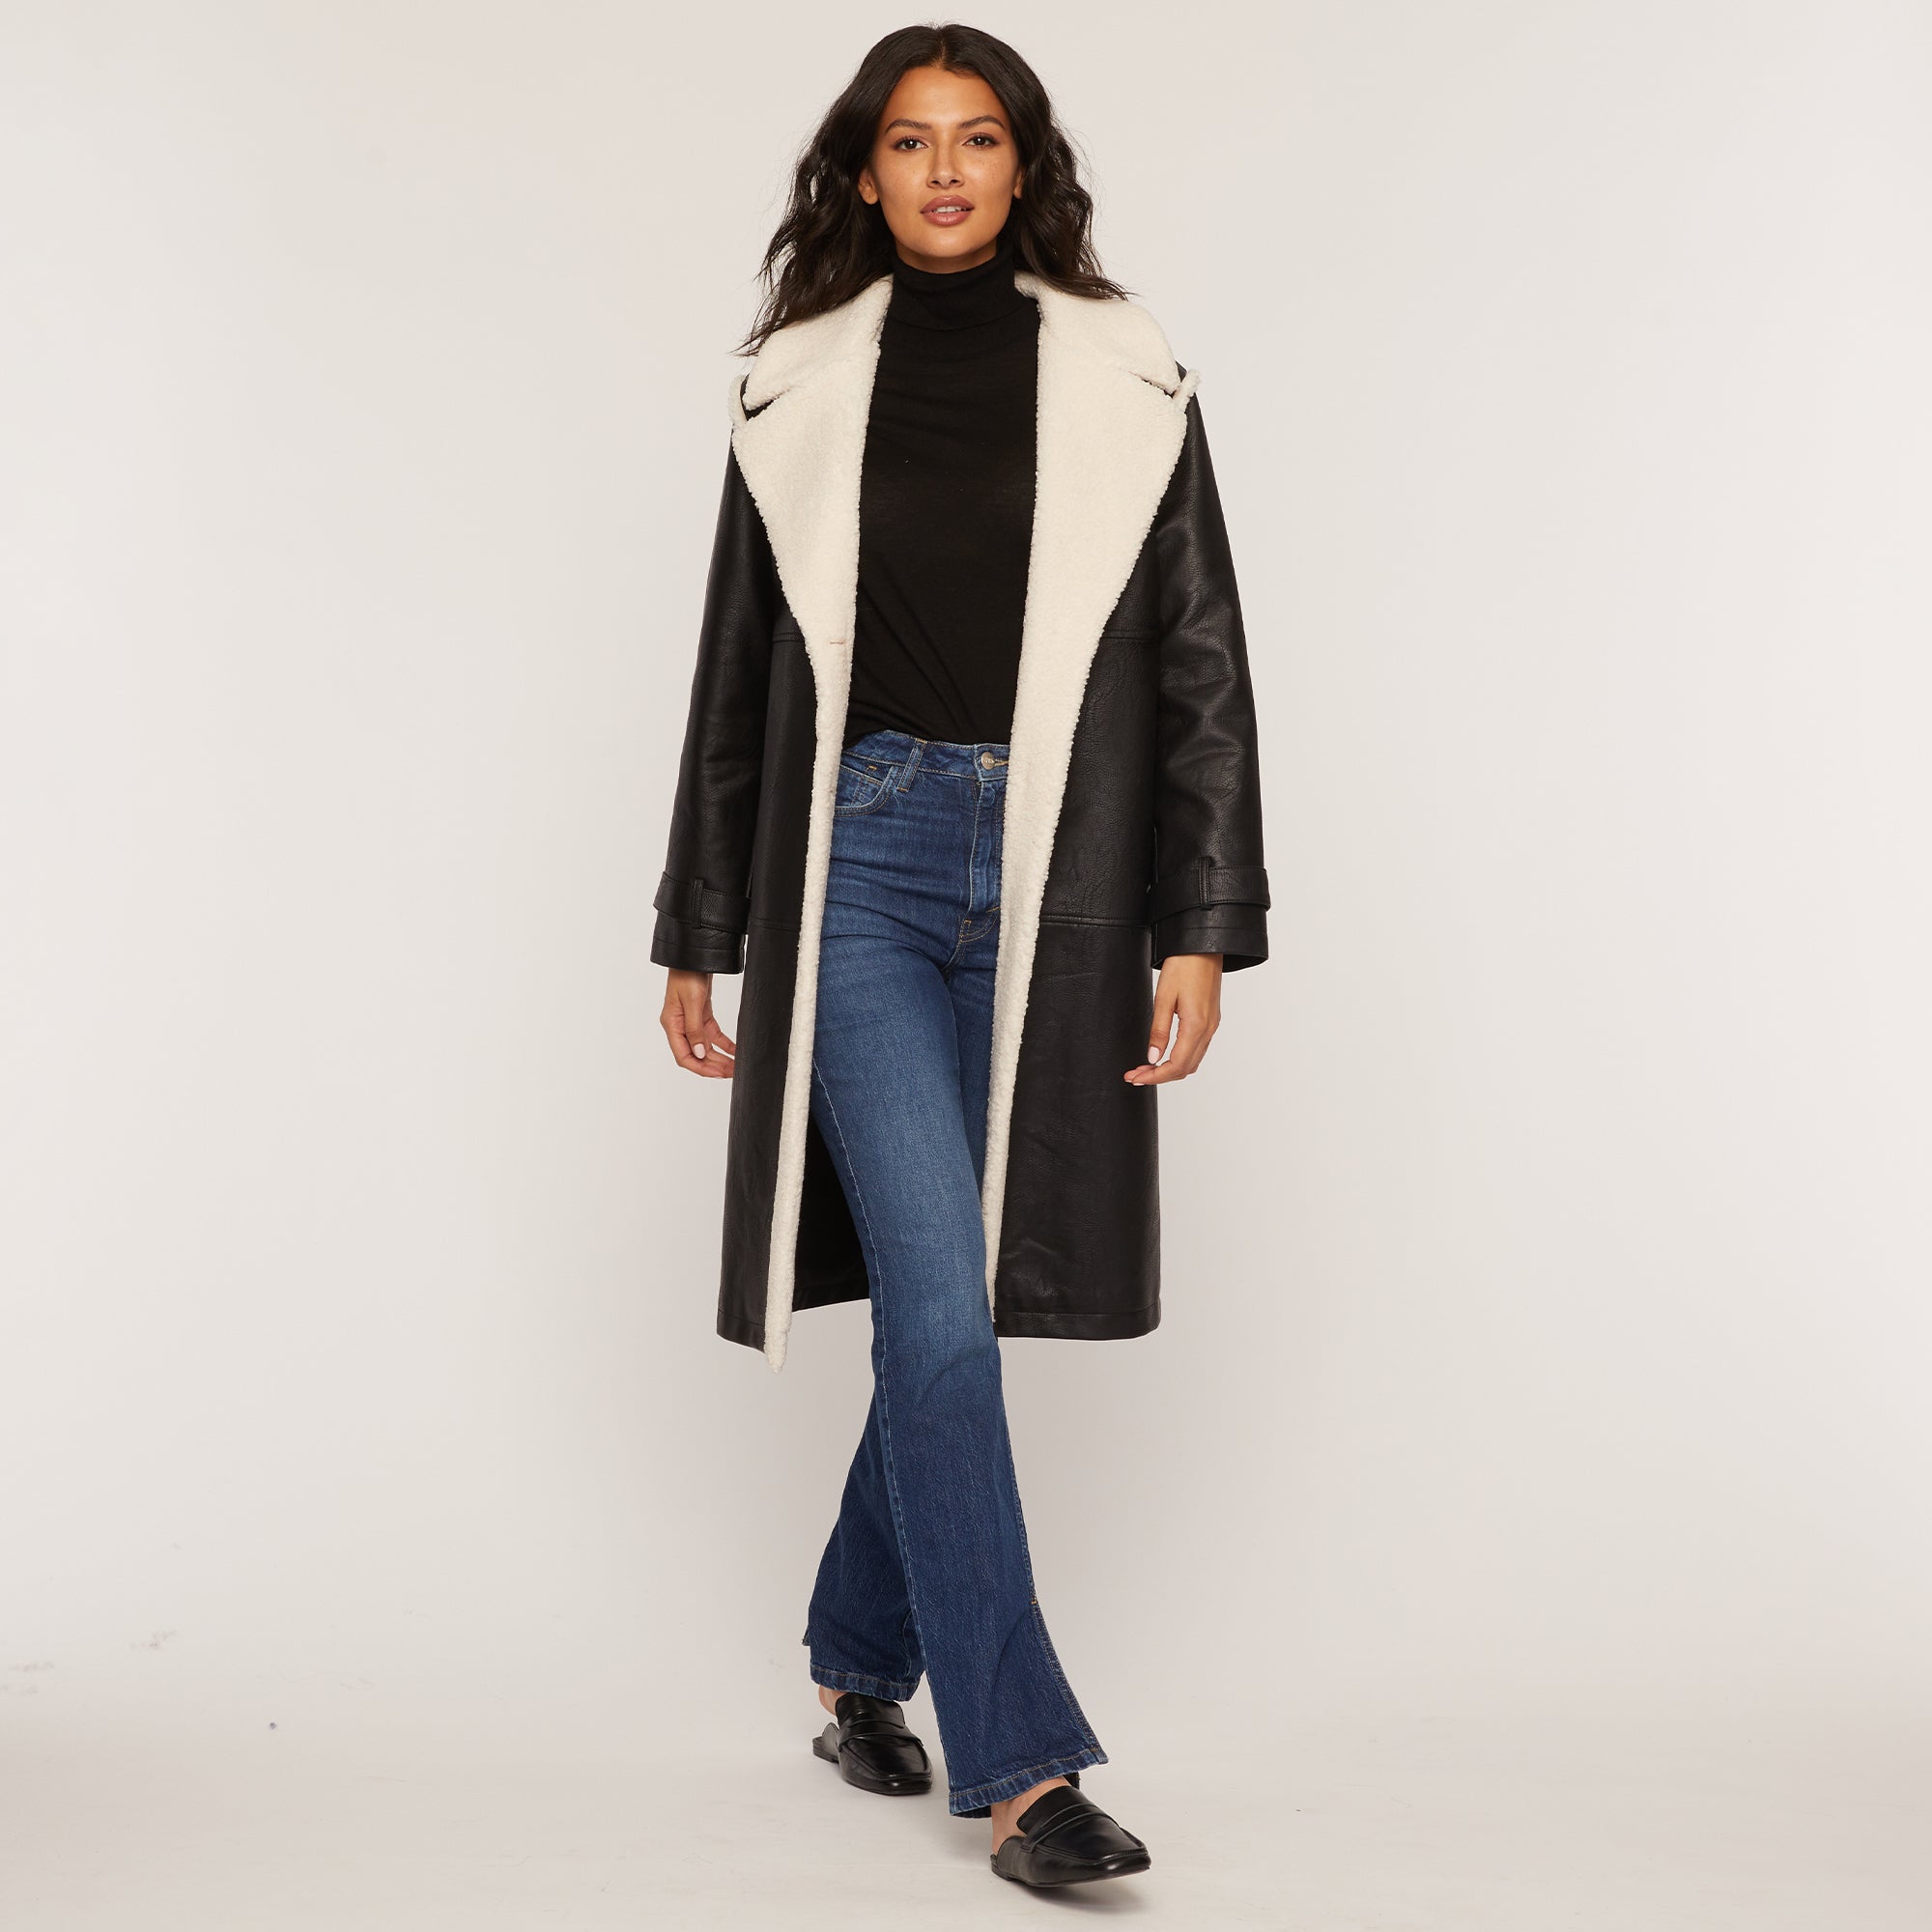 Faux Leather Shearling Trim Coat